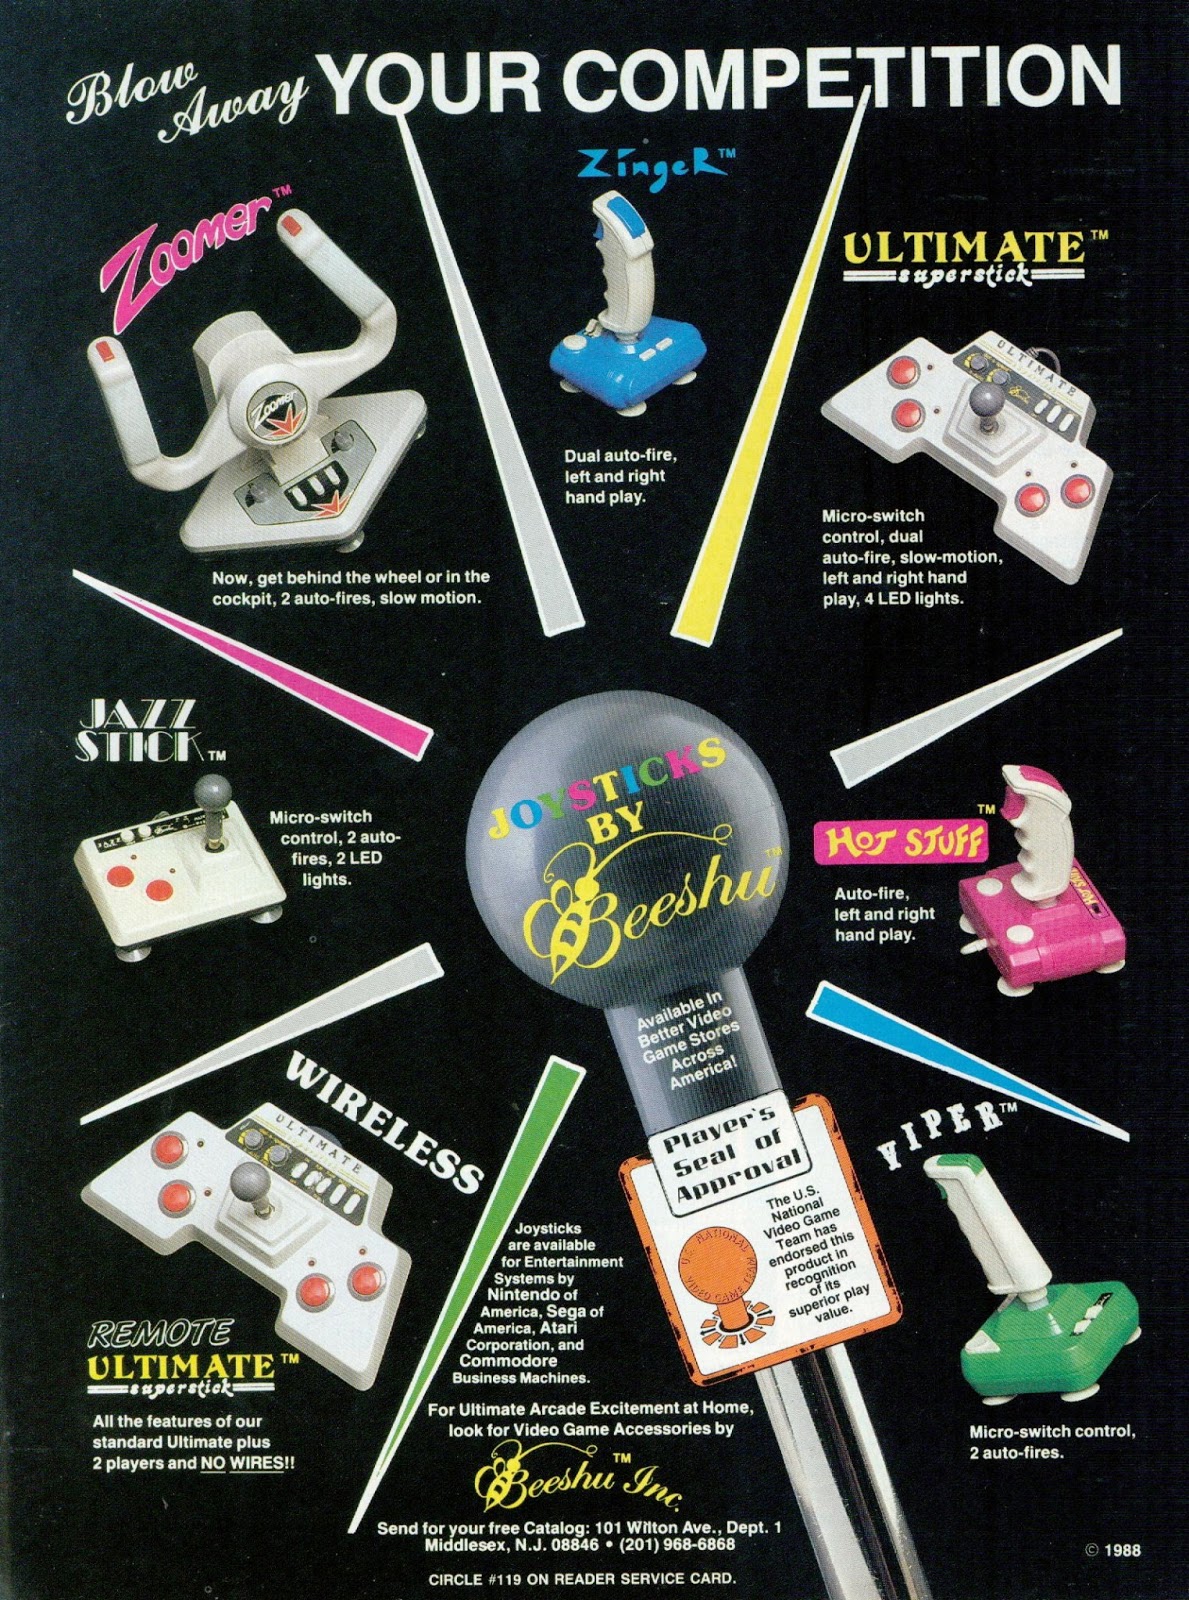 vintage gaming ads - Blow way Your Competition Zing Ultimate Norget behind the wholar in the Sm Hot Stuff anandri Wireless Pi Di Prenote Ultimate Stand Units 2 players and No Wres Bewehr Grcle Her Readin Service Care